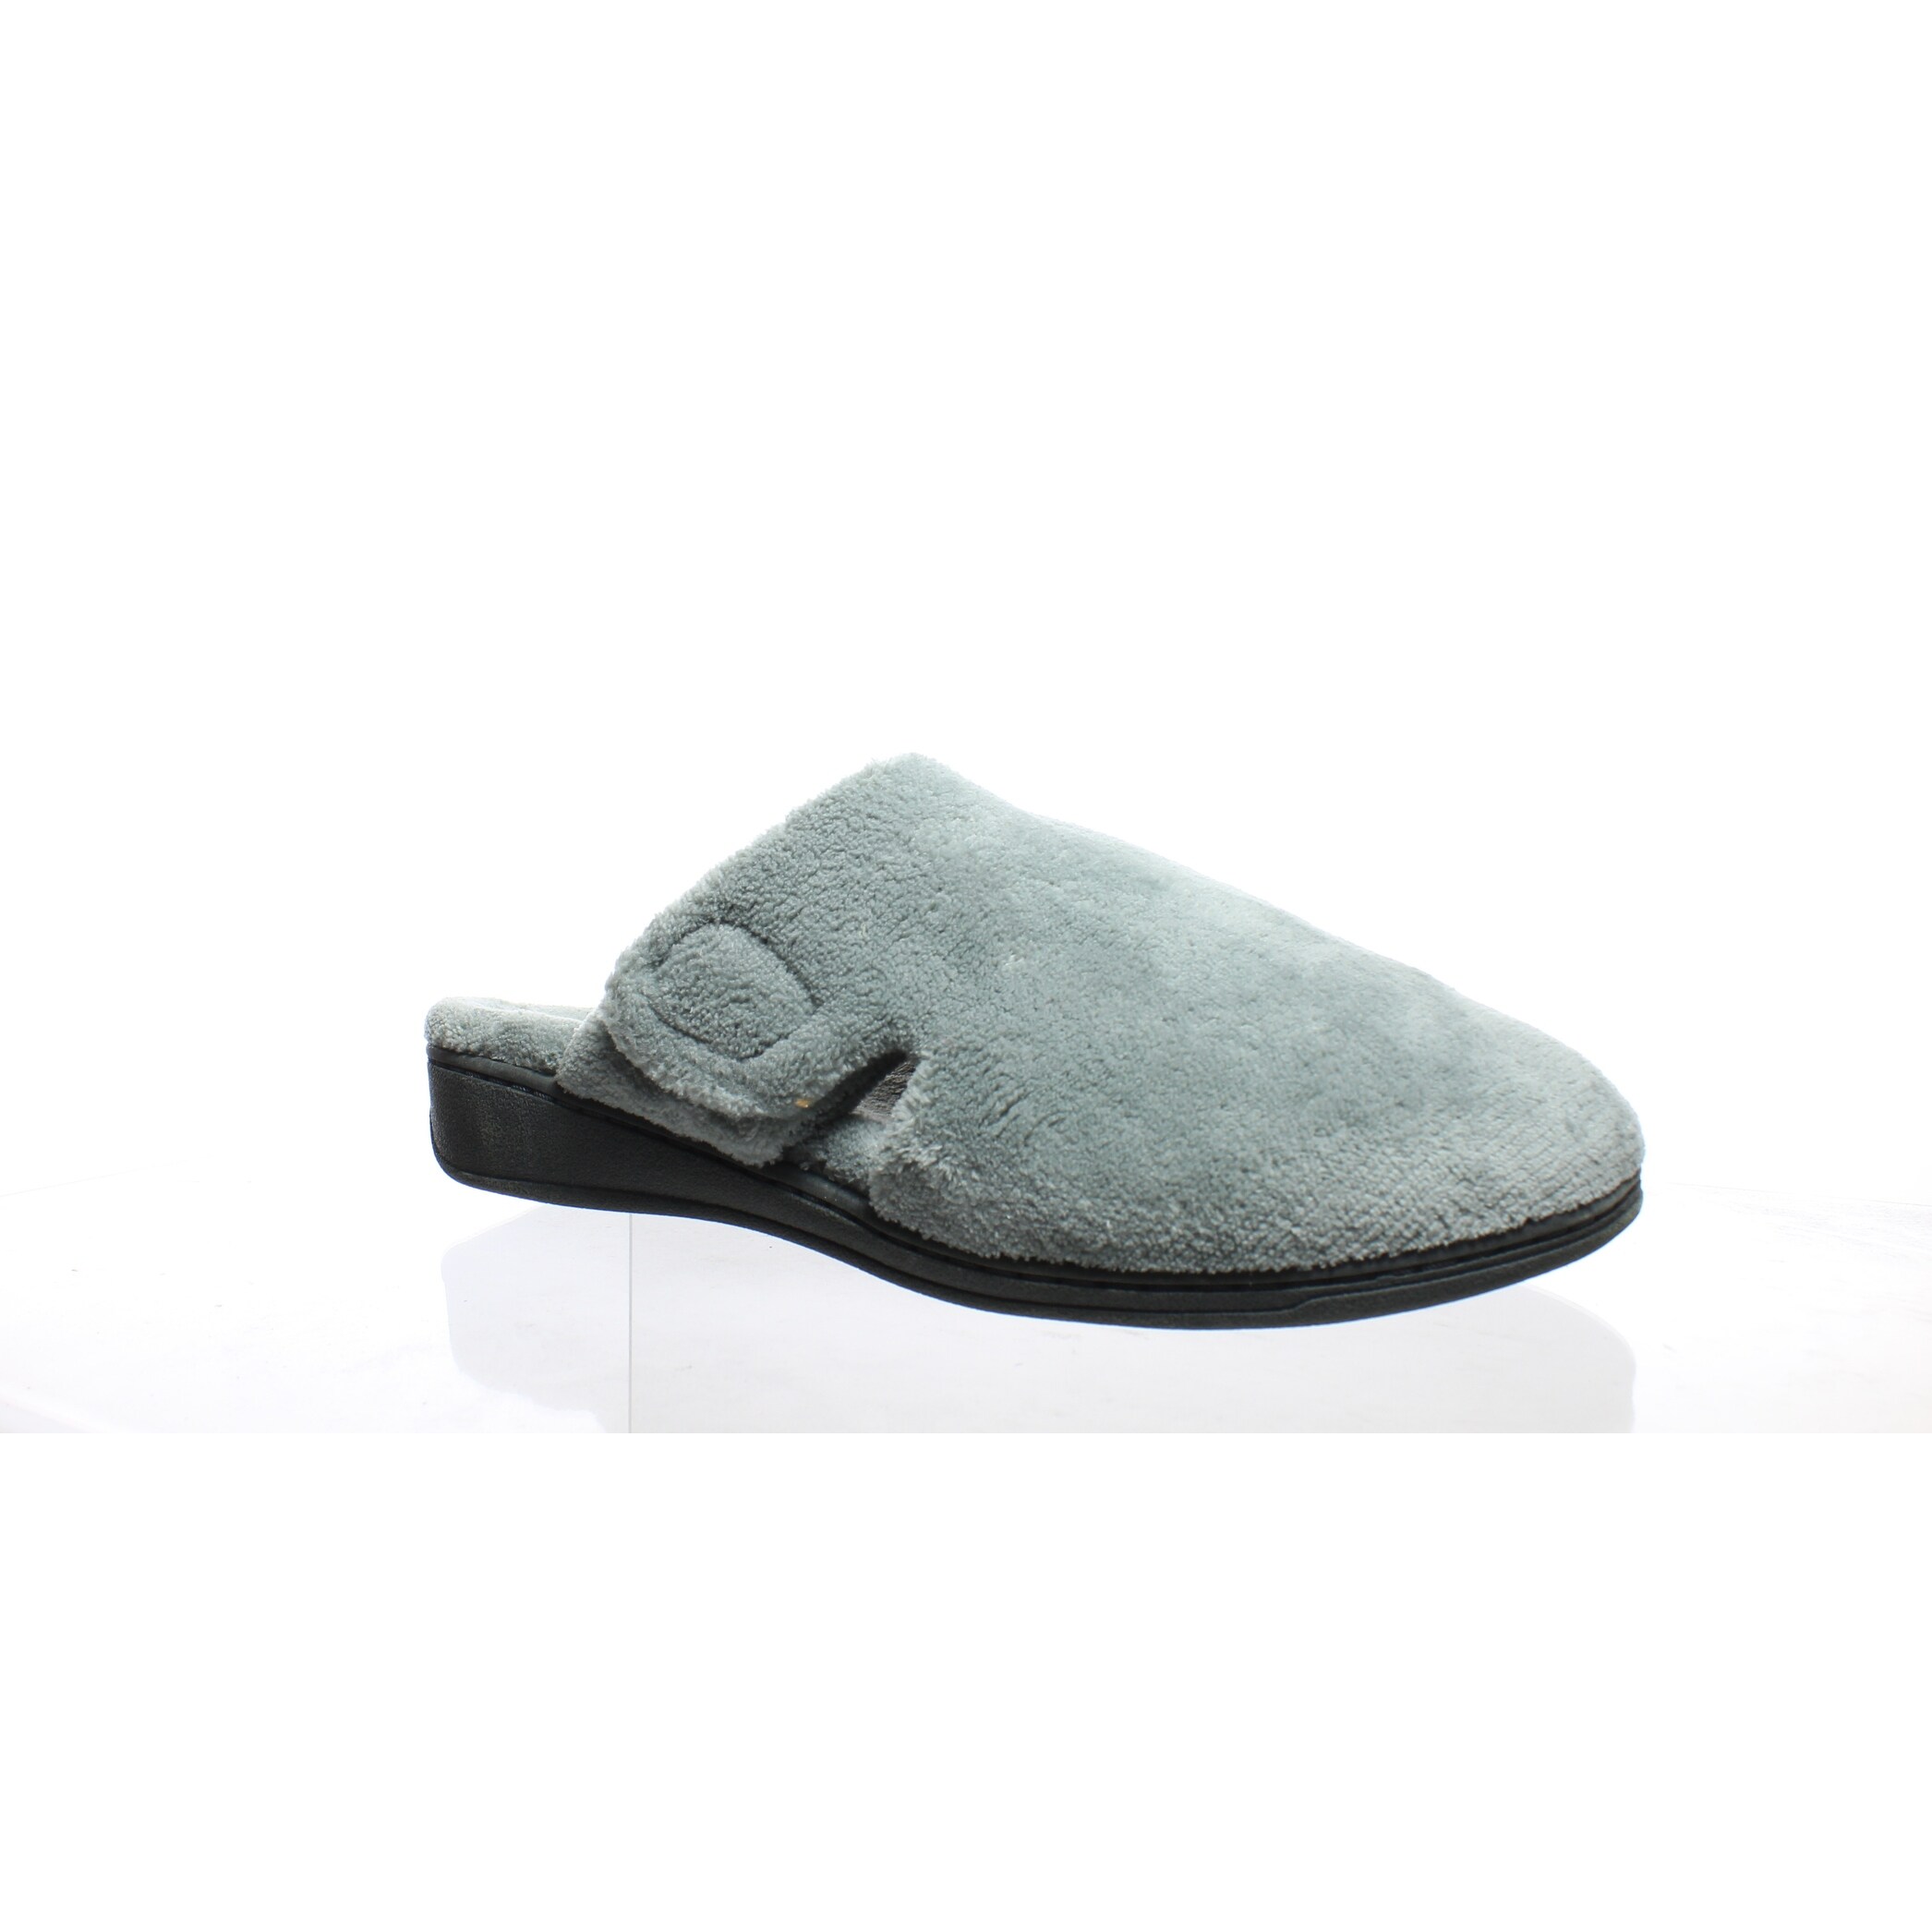 vionic slippers size 9